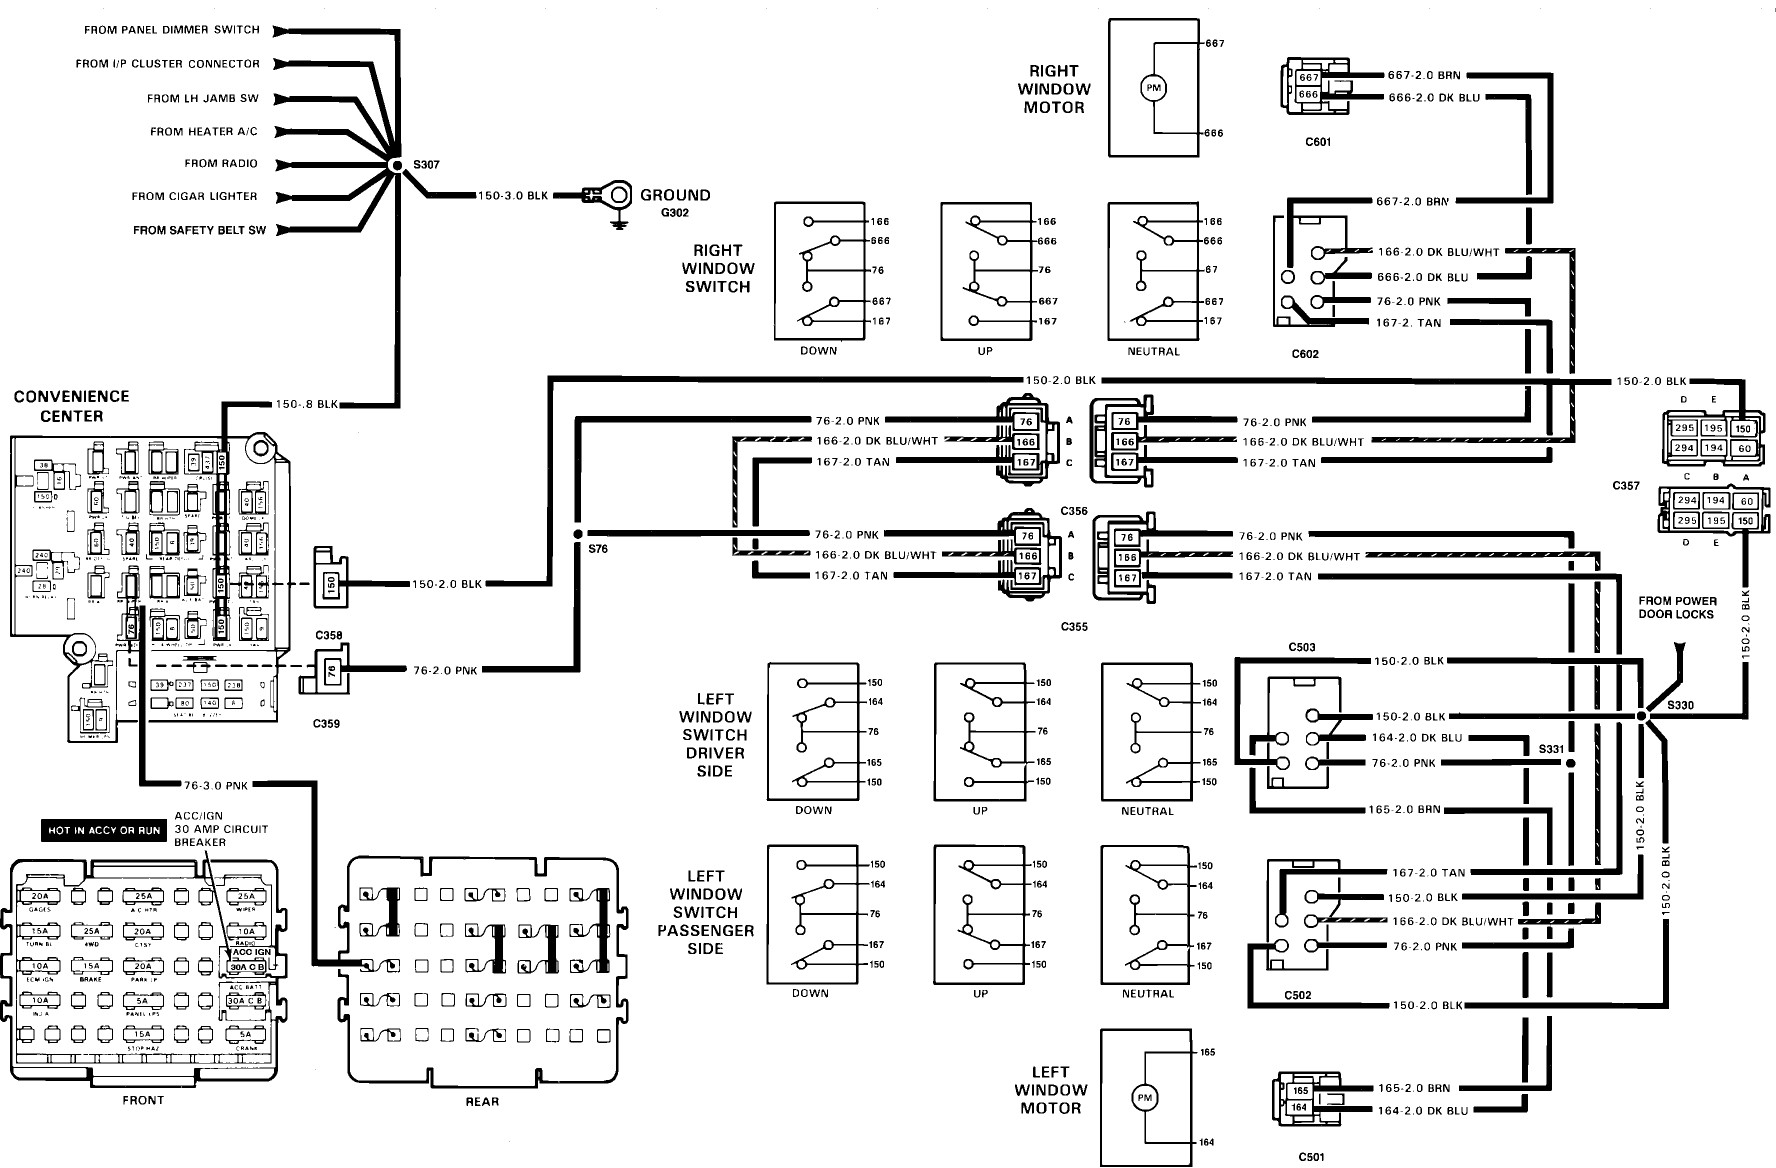 1997 Chevy S10 Wiring Diagram Suburban Parts Diagram Besides Gm Bulkhead Connector Wiring Diagram Of 1997 Chevy S10 Wiring Diagram